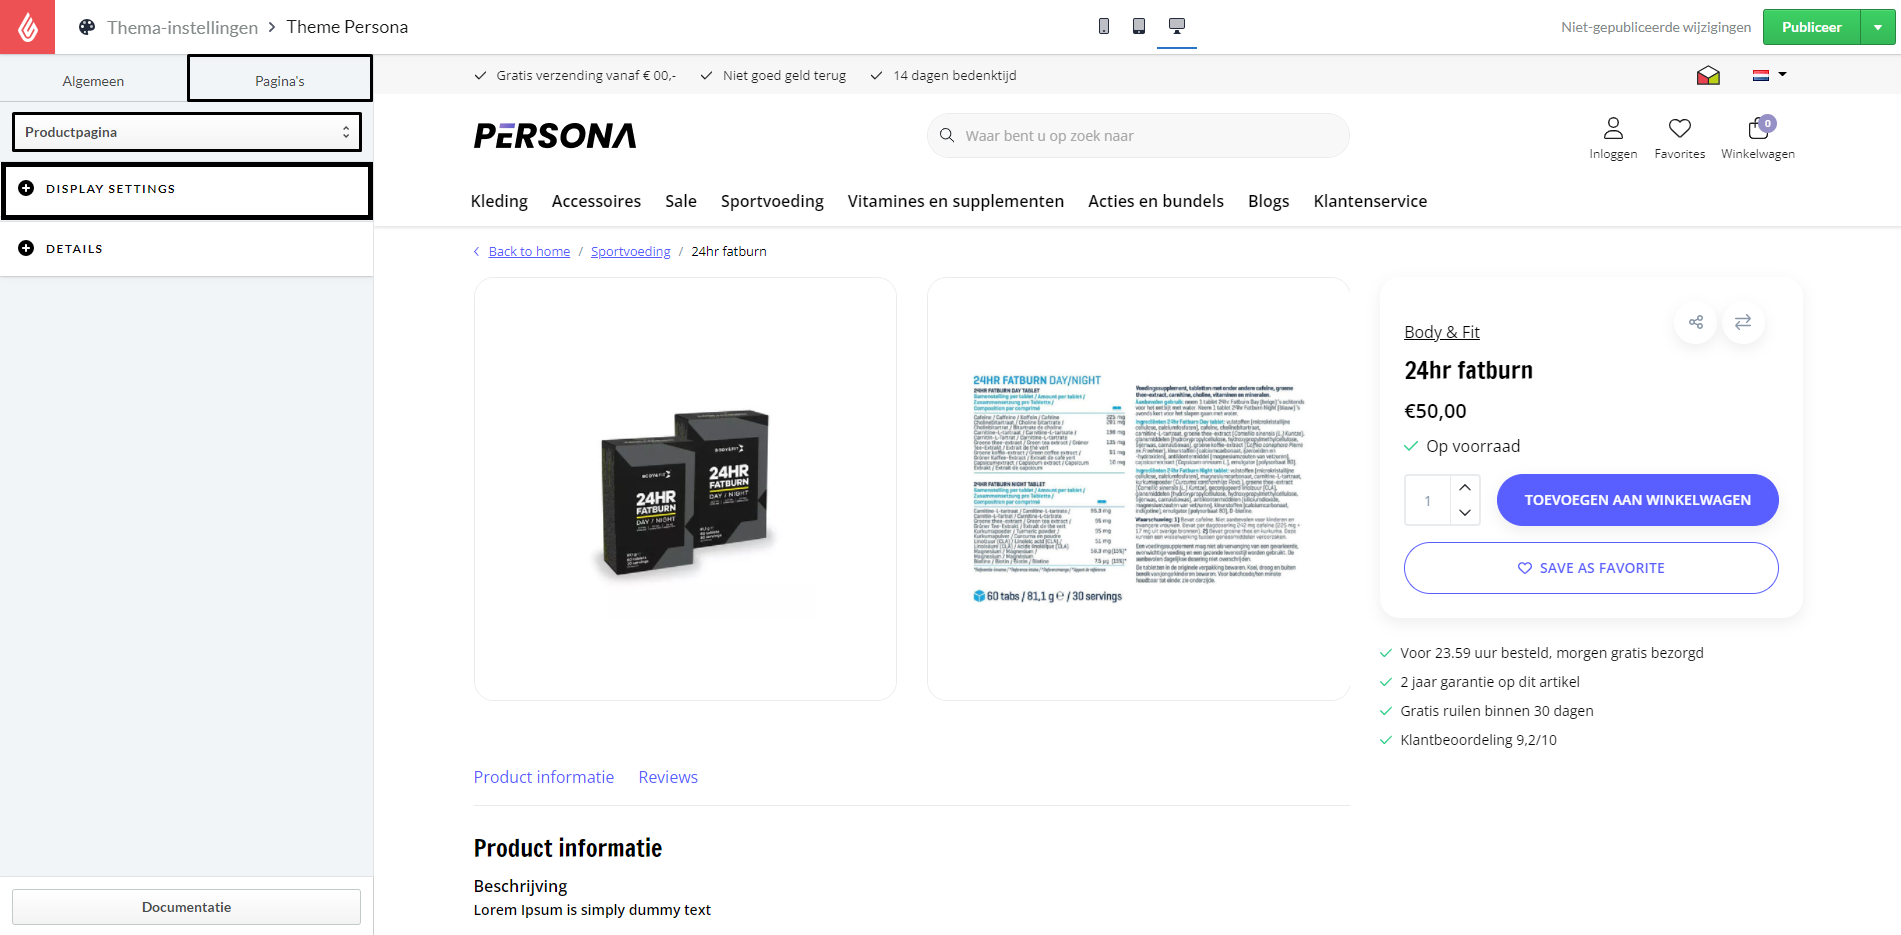 Theme Persona Productpage Display